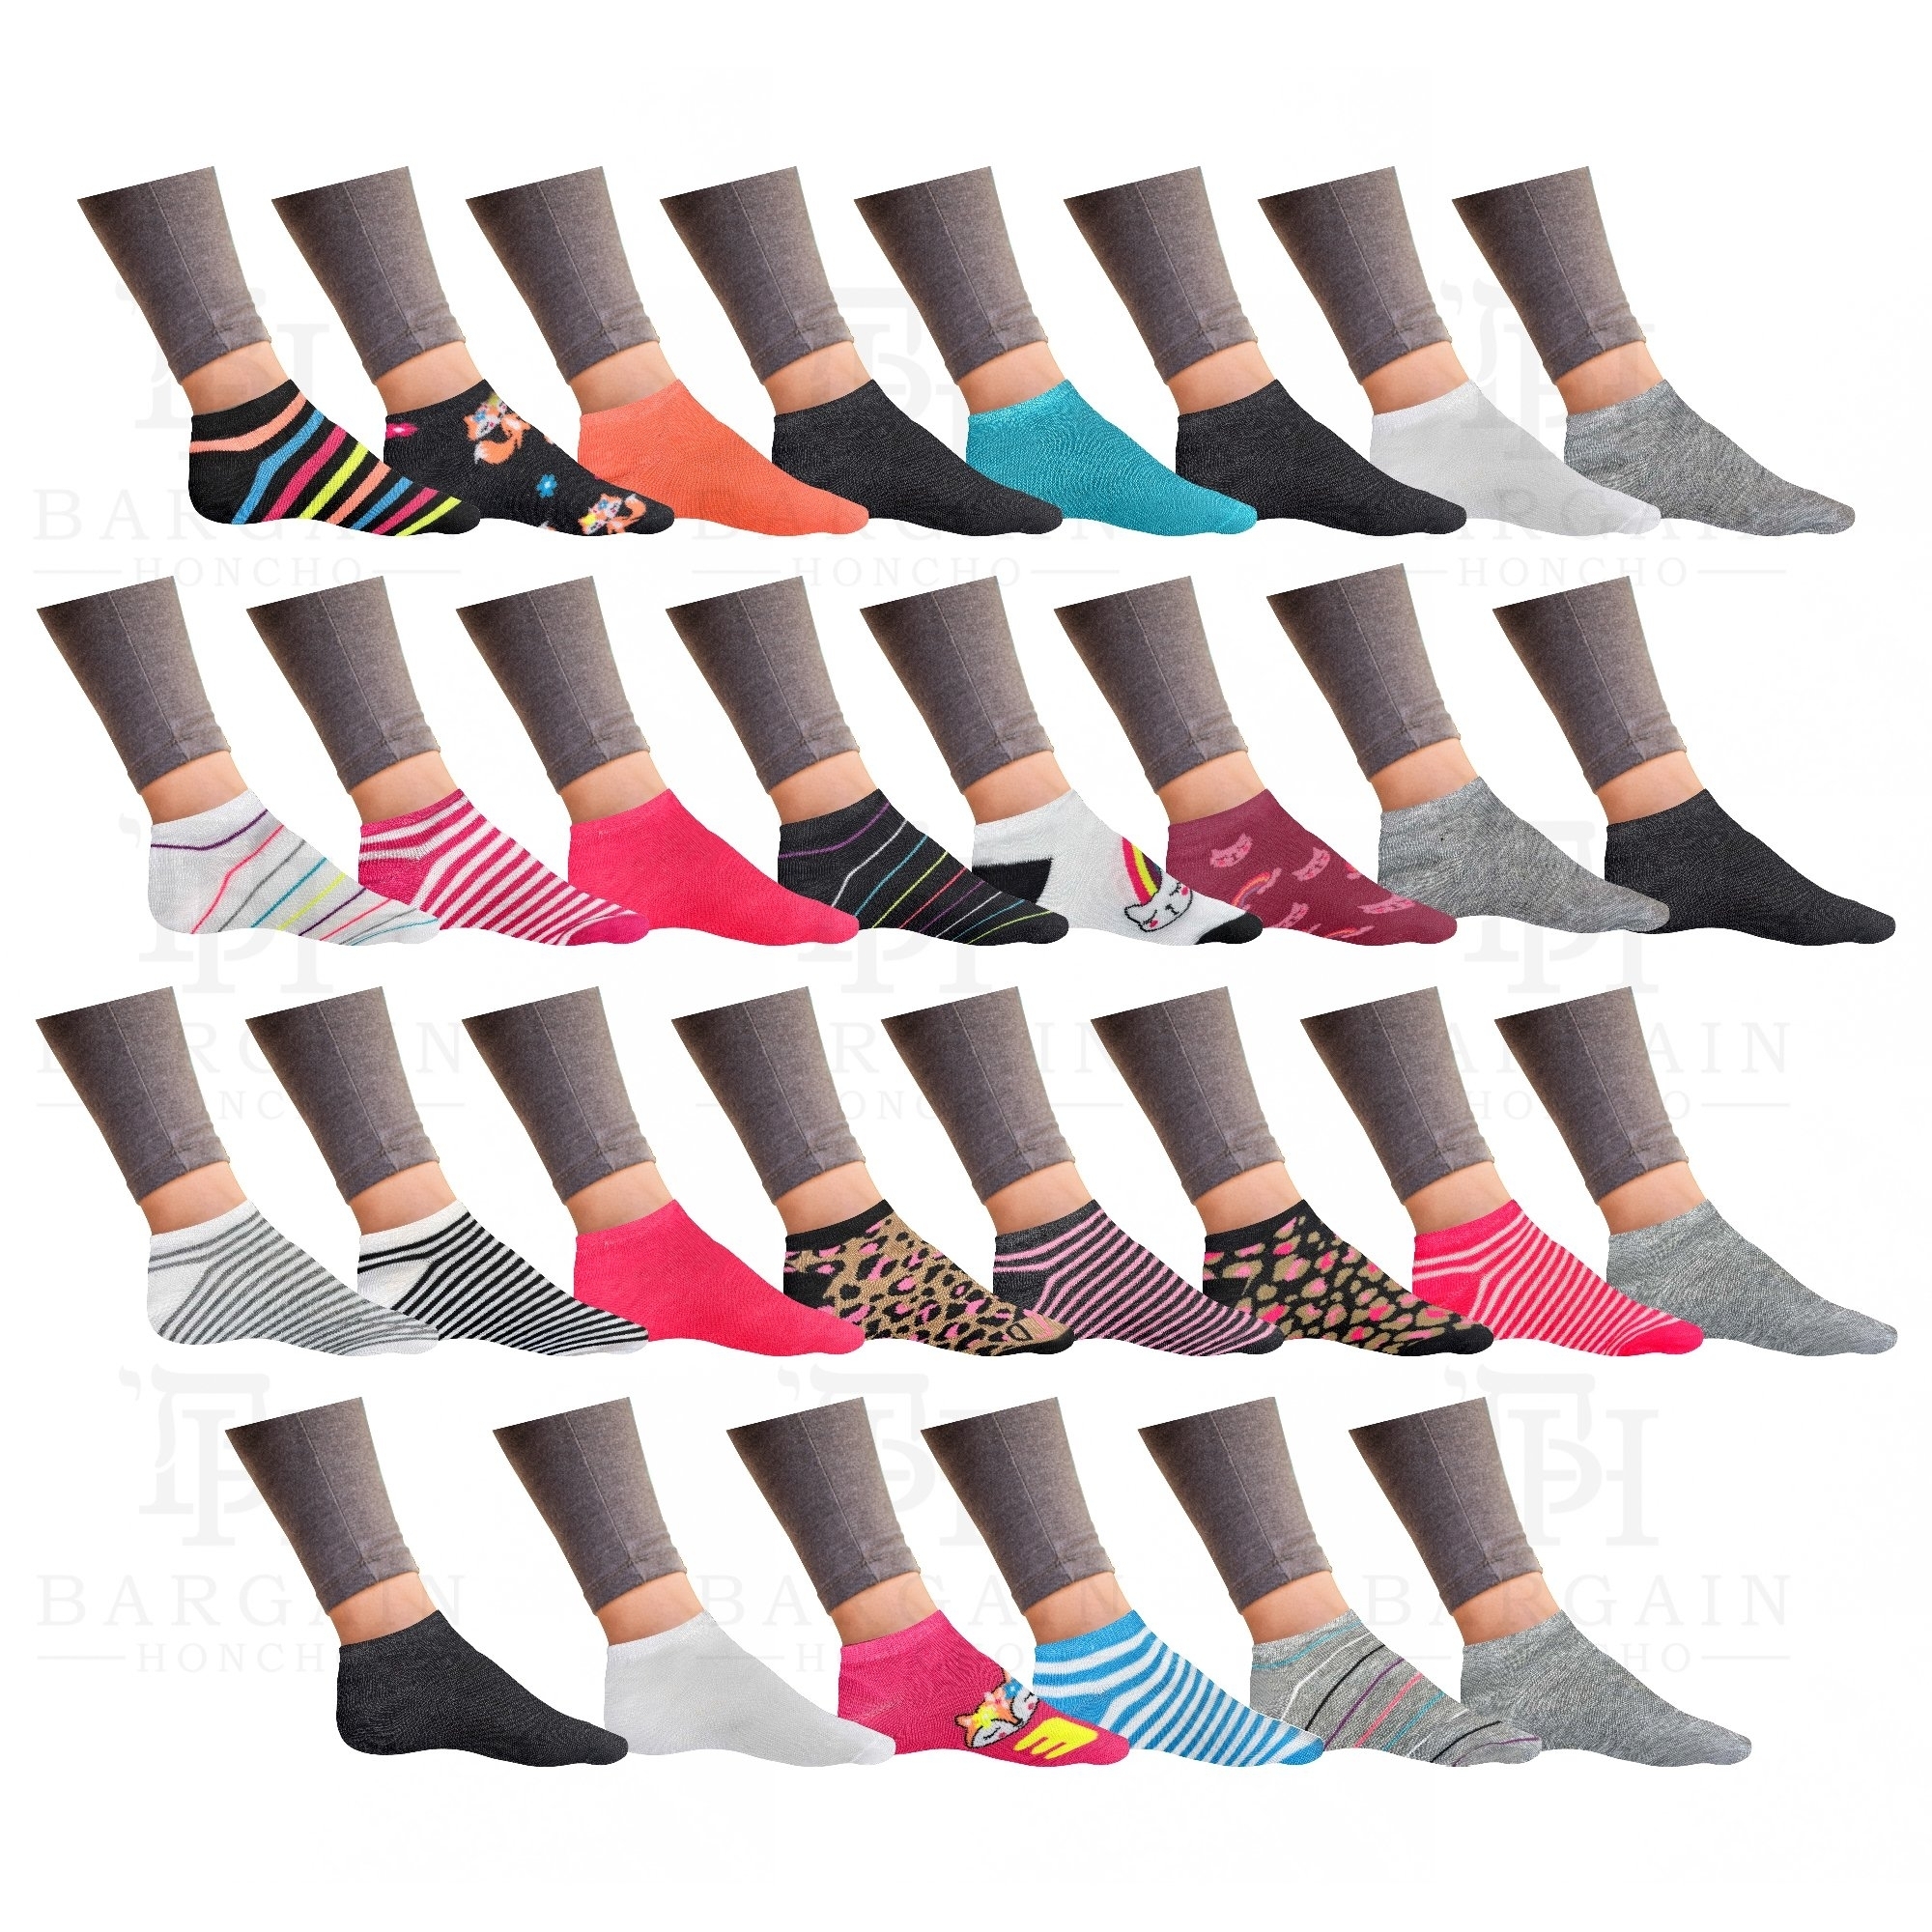 10-Pair: Women’s Breathable Fun Funky Comfortable Colorful No Show Low Cut Ankle Socks - 20-Pairs